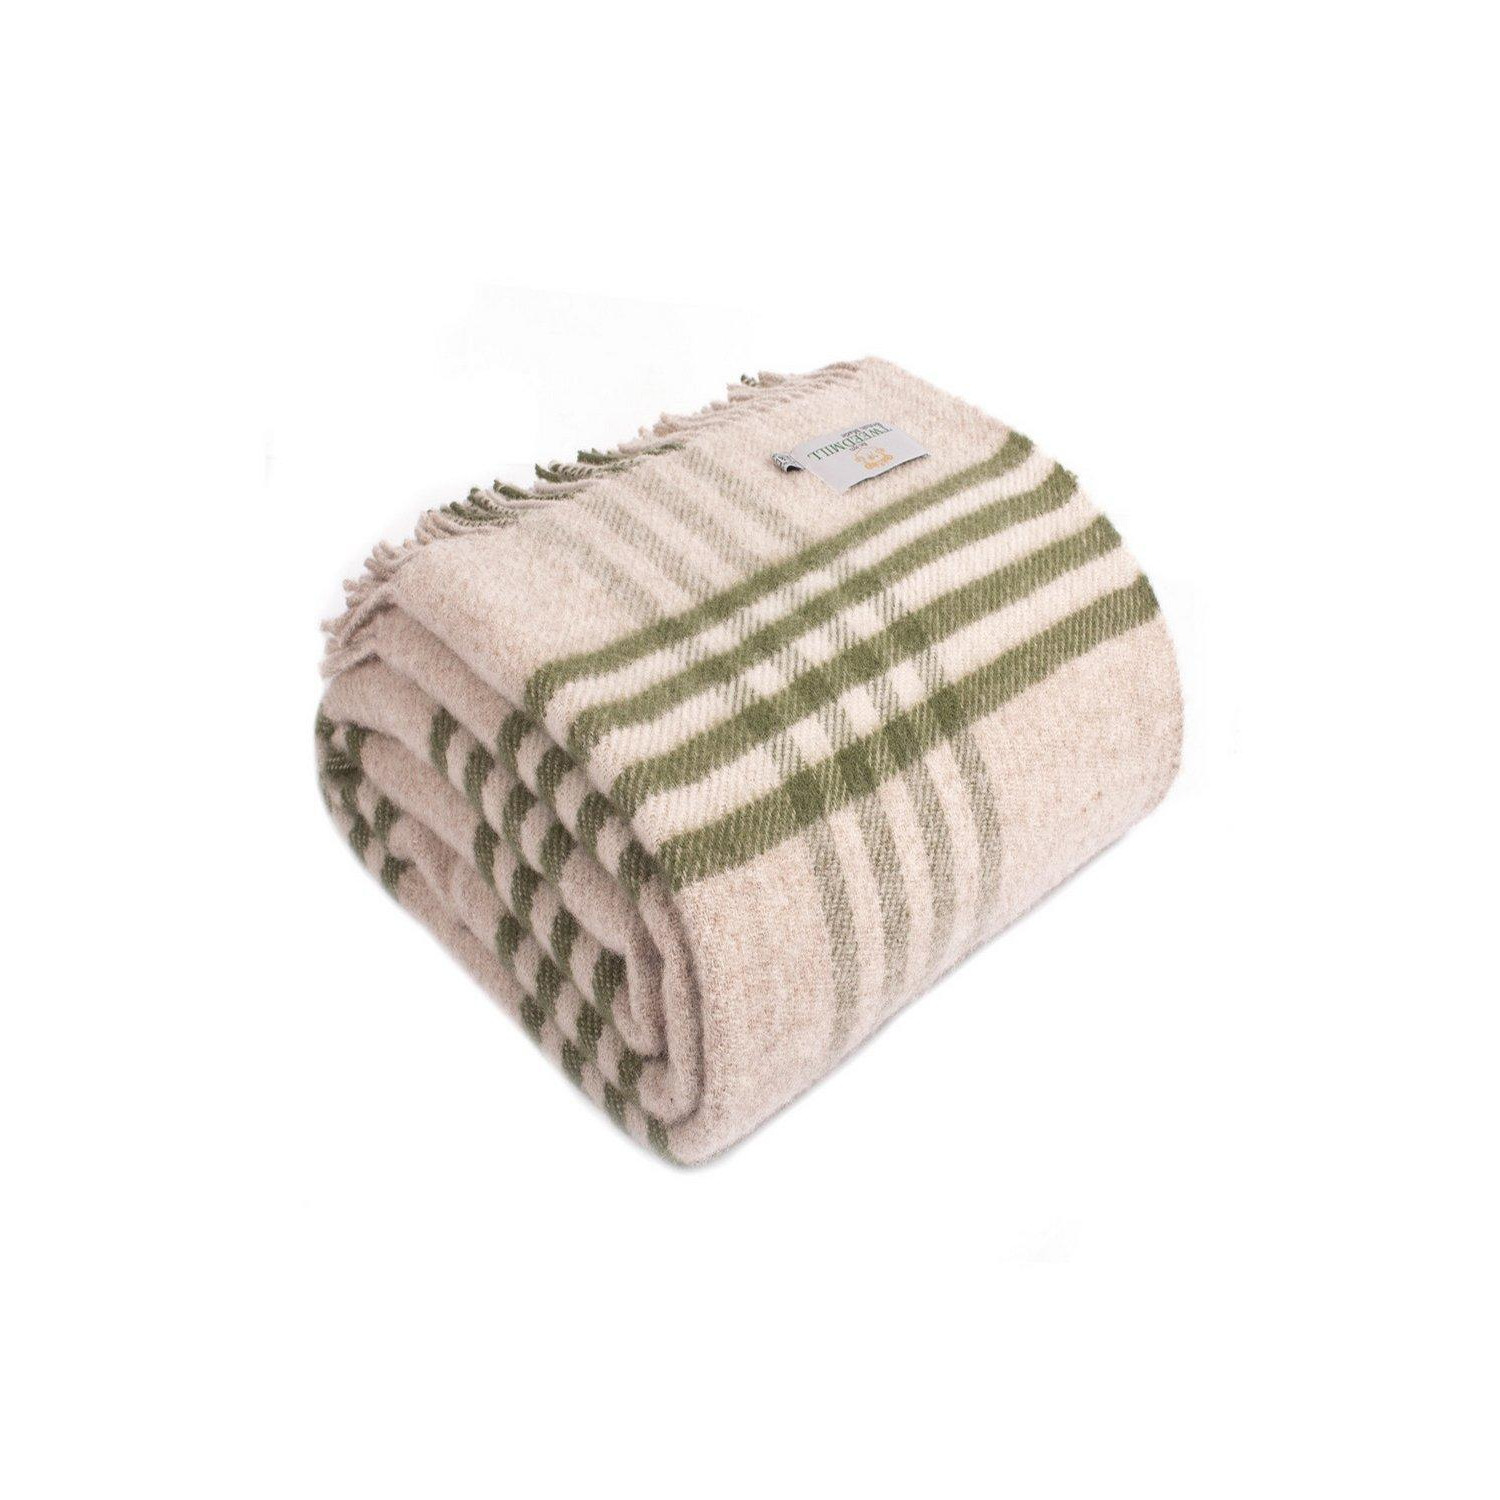 100% Pure New Wool Hex Check Throw Blanket Made in Wales - image 1